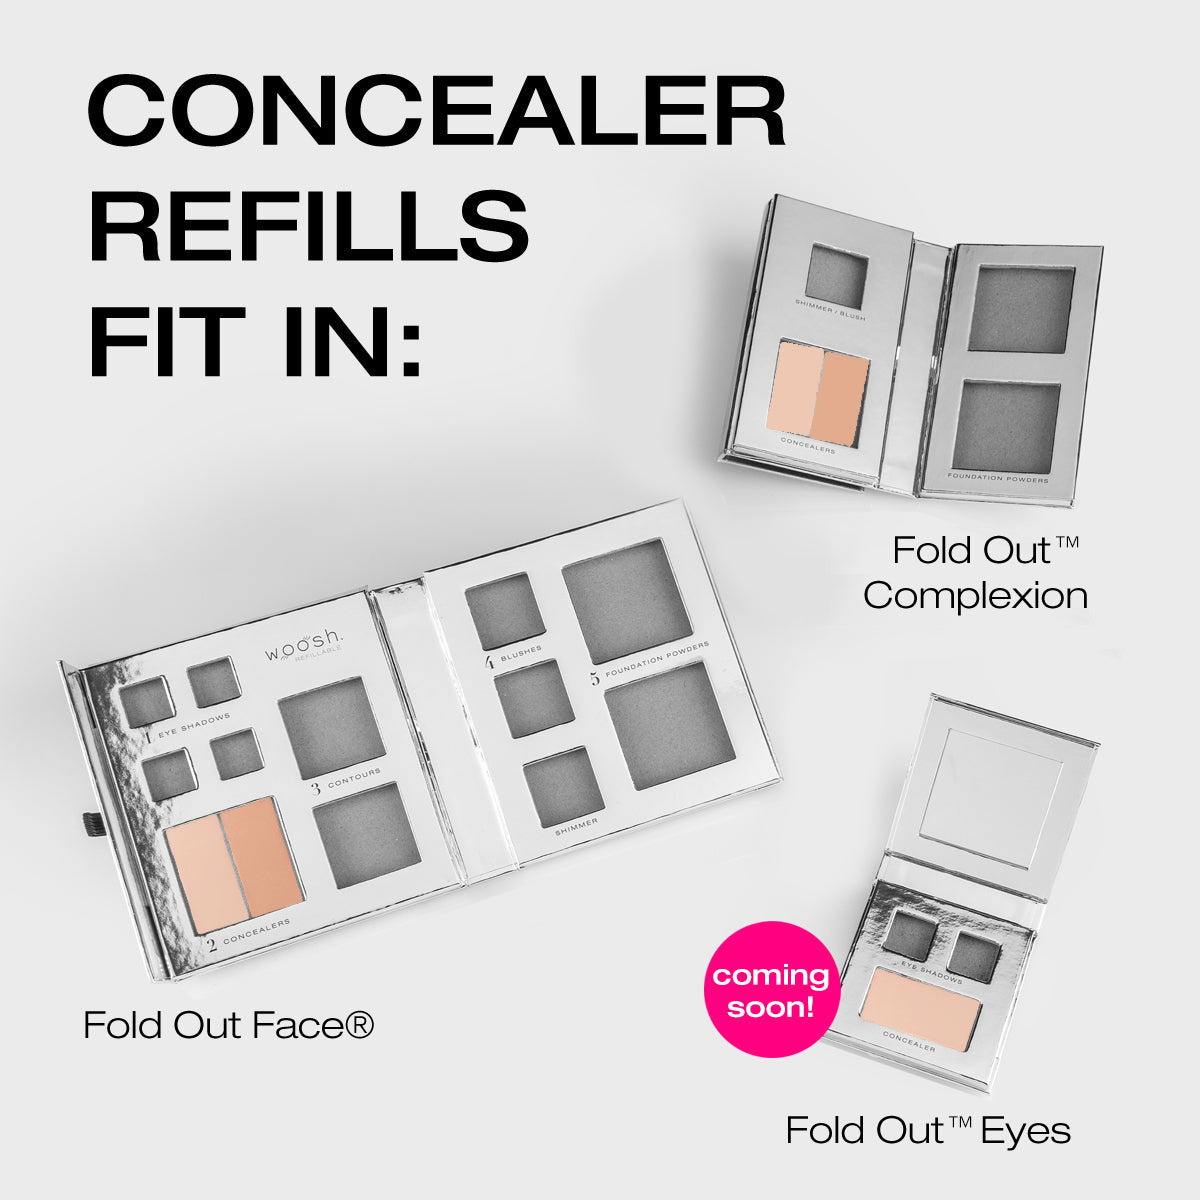 images of the fold out complexion, fold out face, and fold out eyes with the concealers placed inside the empty palette.